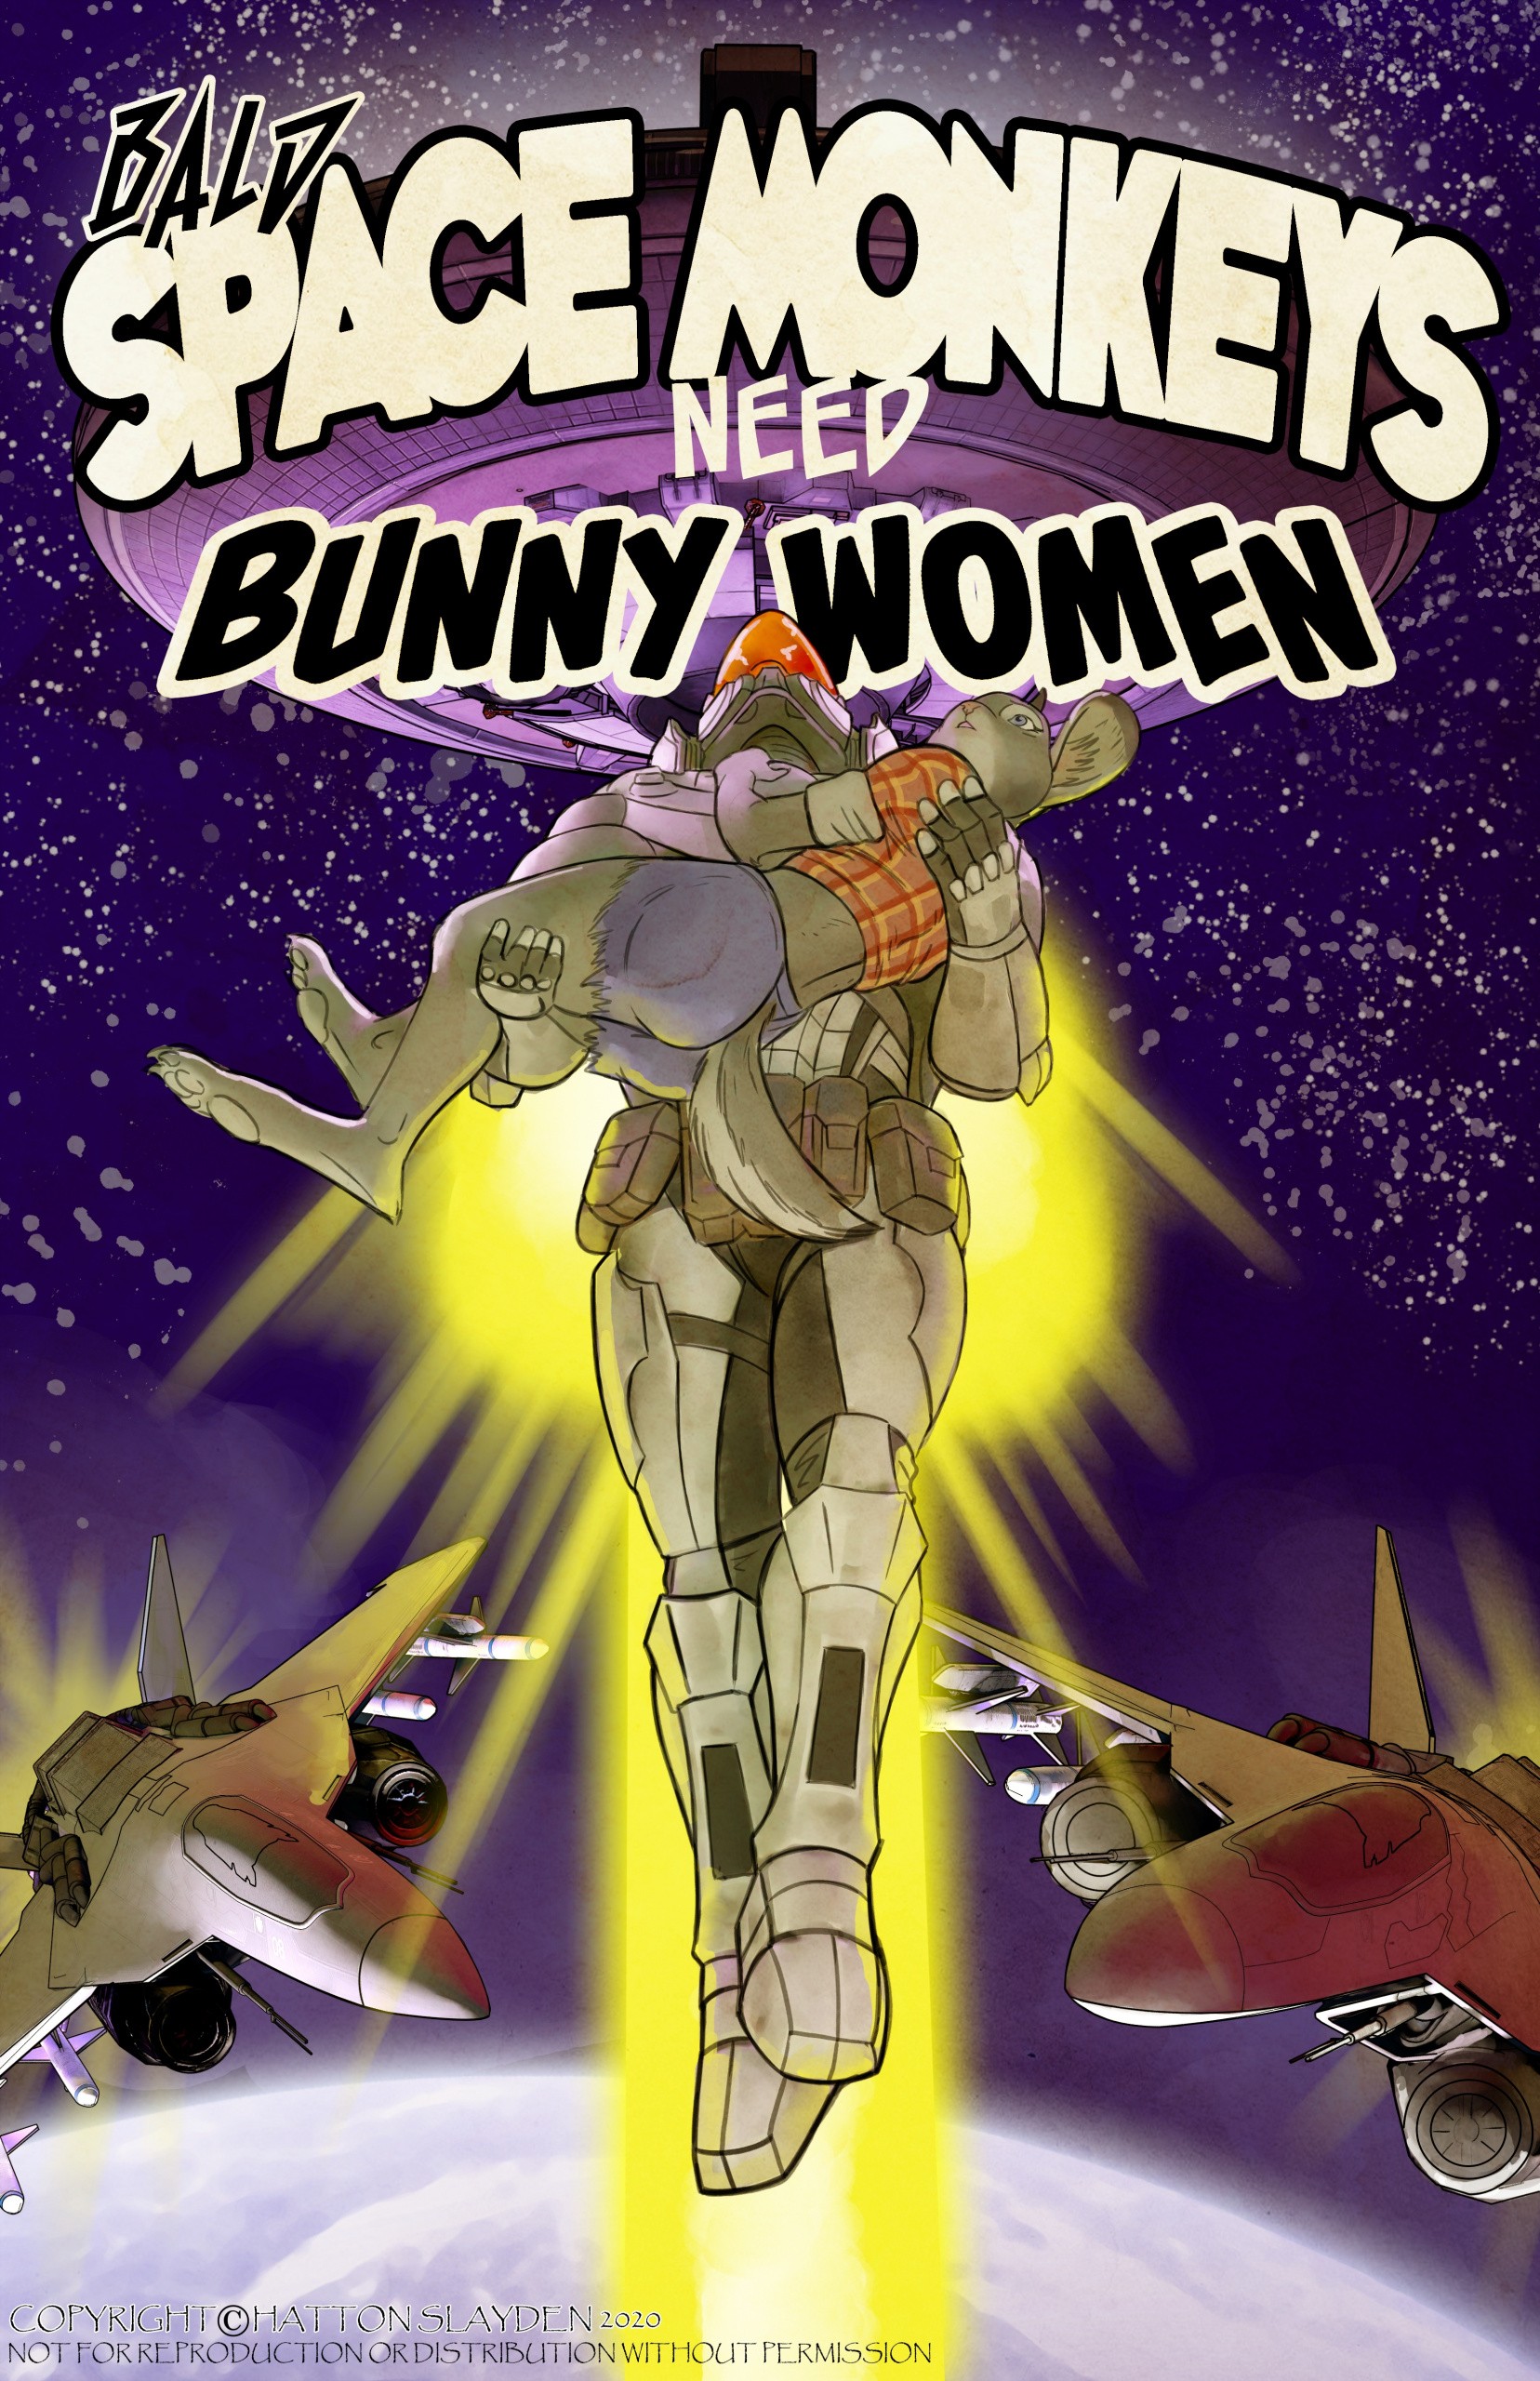 Bald Space Monkeys Need Bunny Woman porn comic picture 1